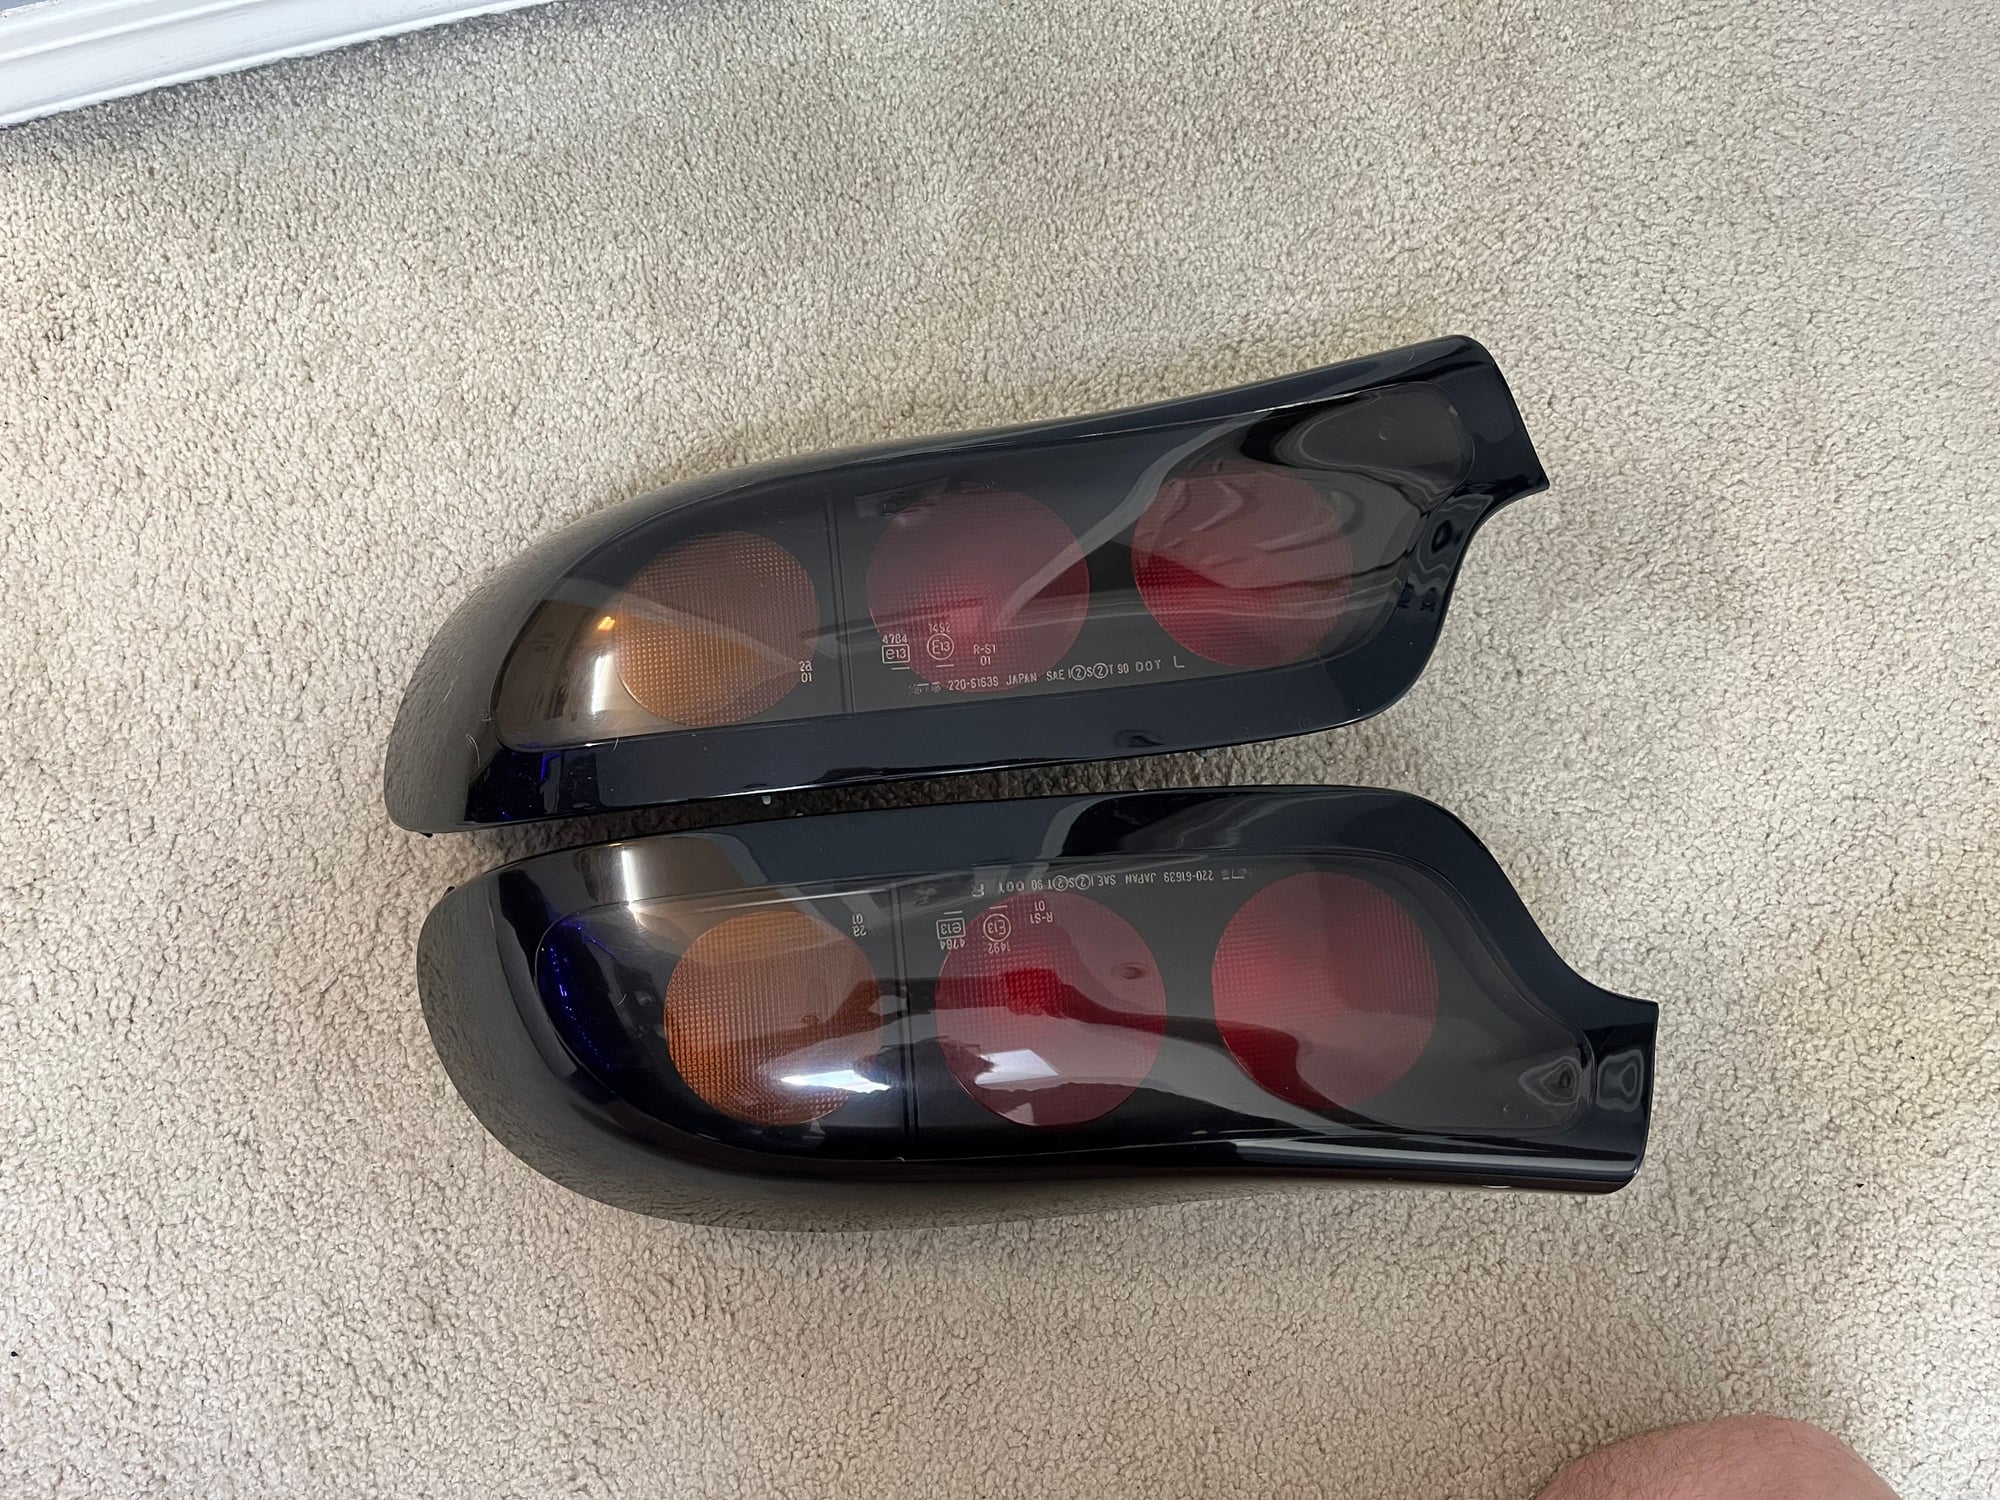 1994 Mazda RX-7 - JDM RX-7 FD3S Genuine Tail lights 99 spec set with Harnesses and LED lights - Lights - $500 - Seattle, WA 98122, United States